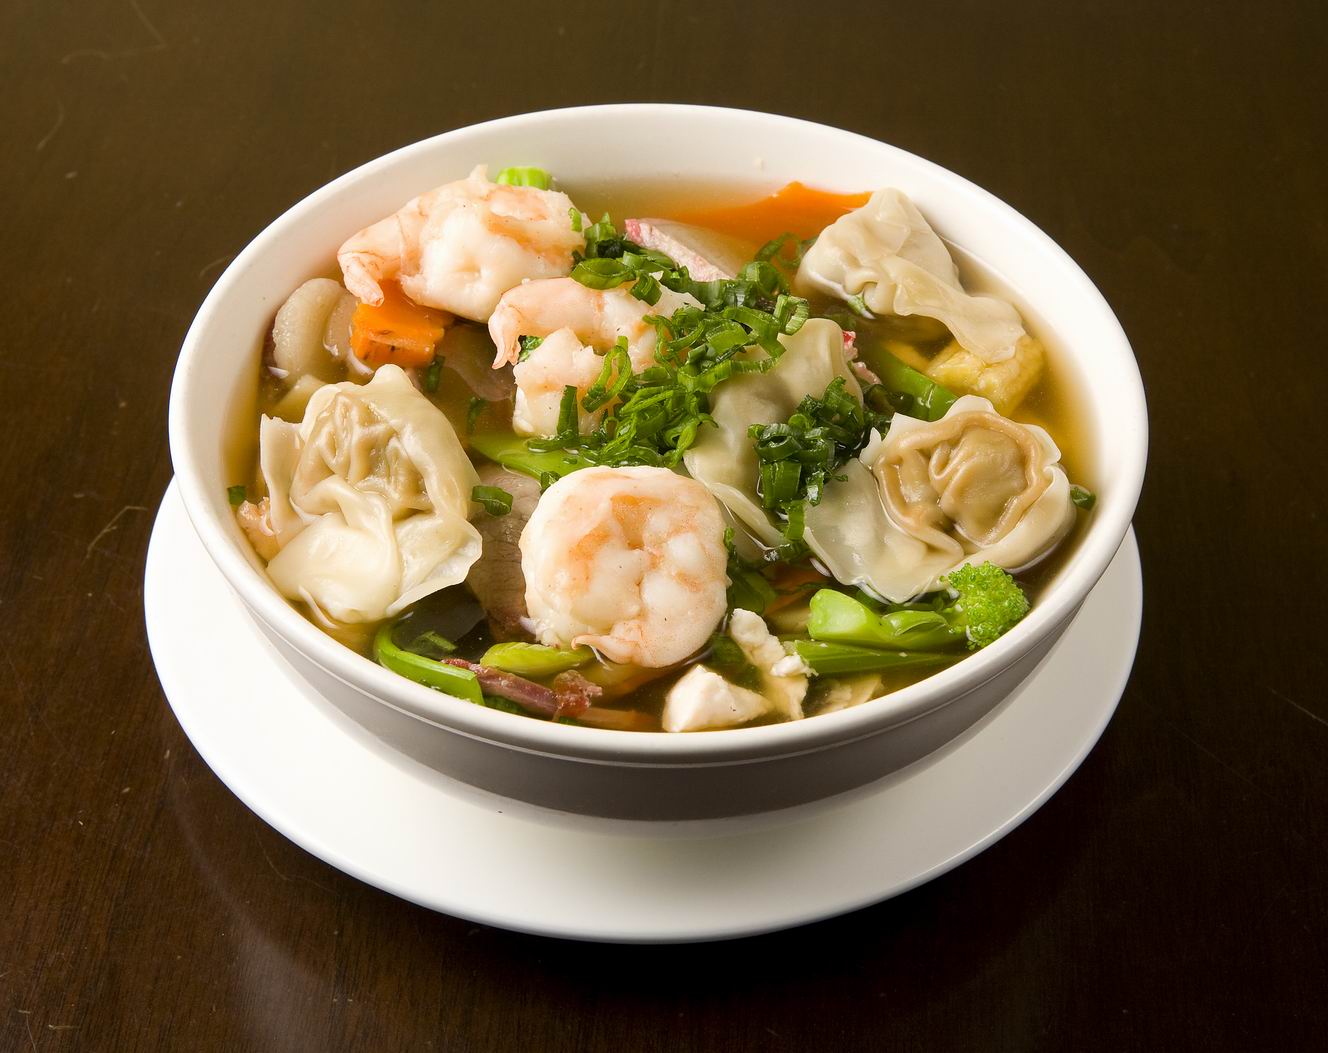 New York Chinese Restaurant - Delivery and Pick up in Las Vegas - 0